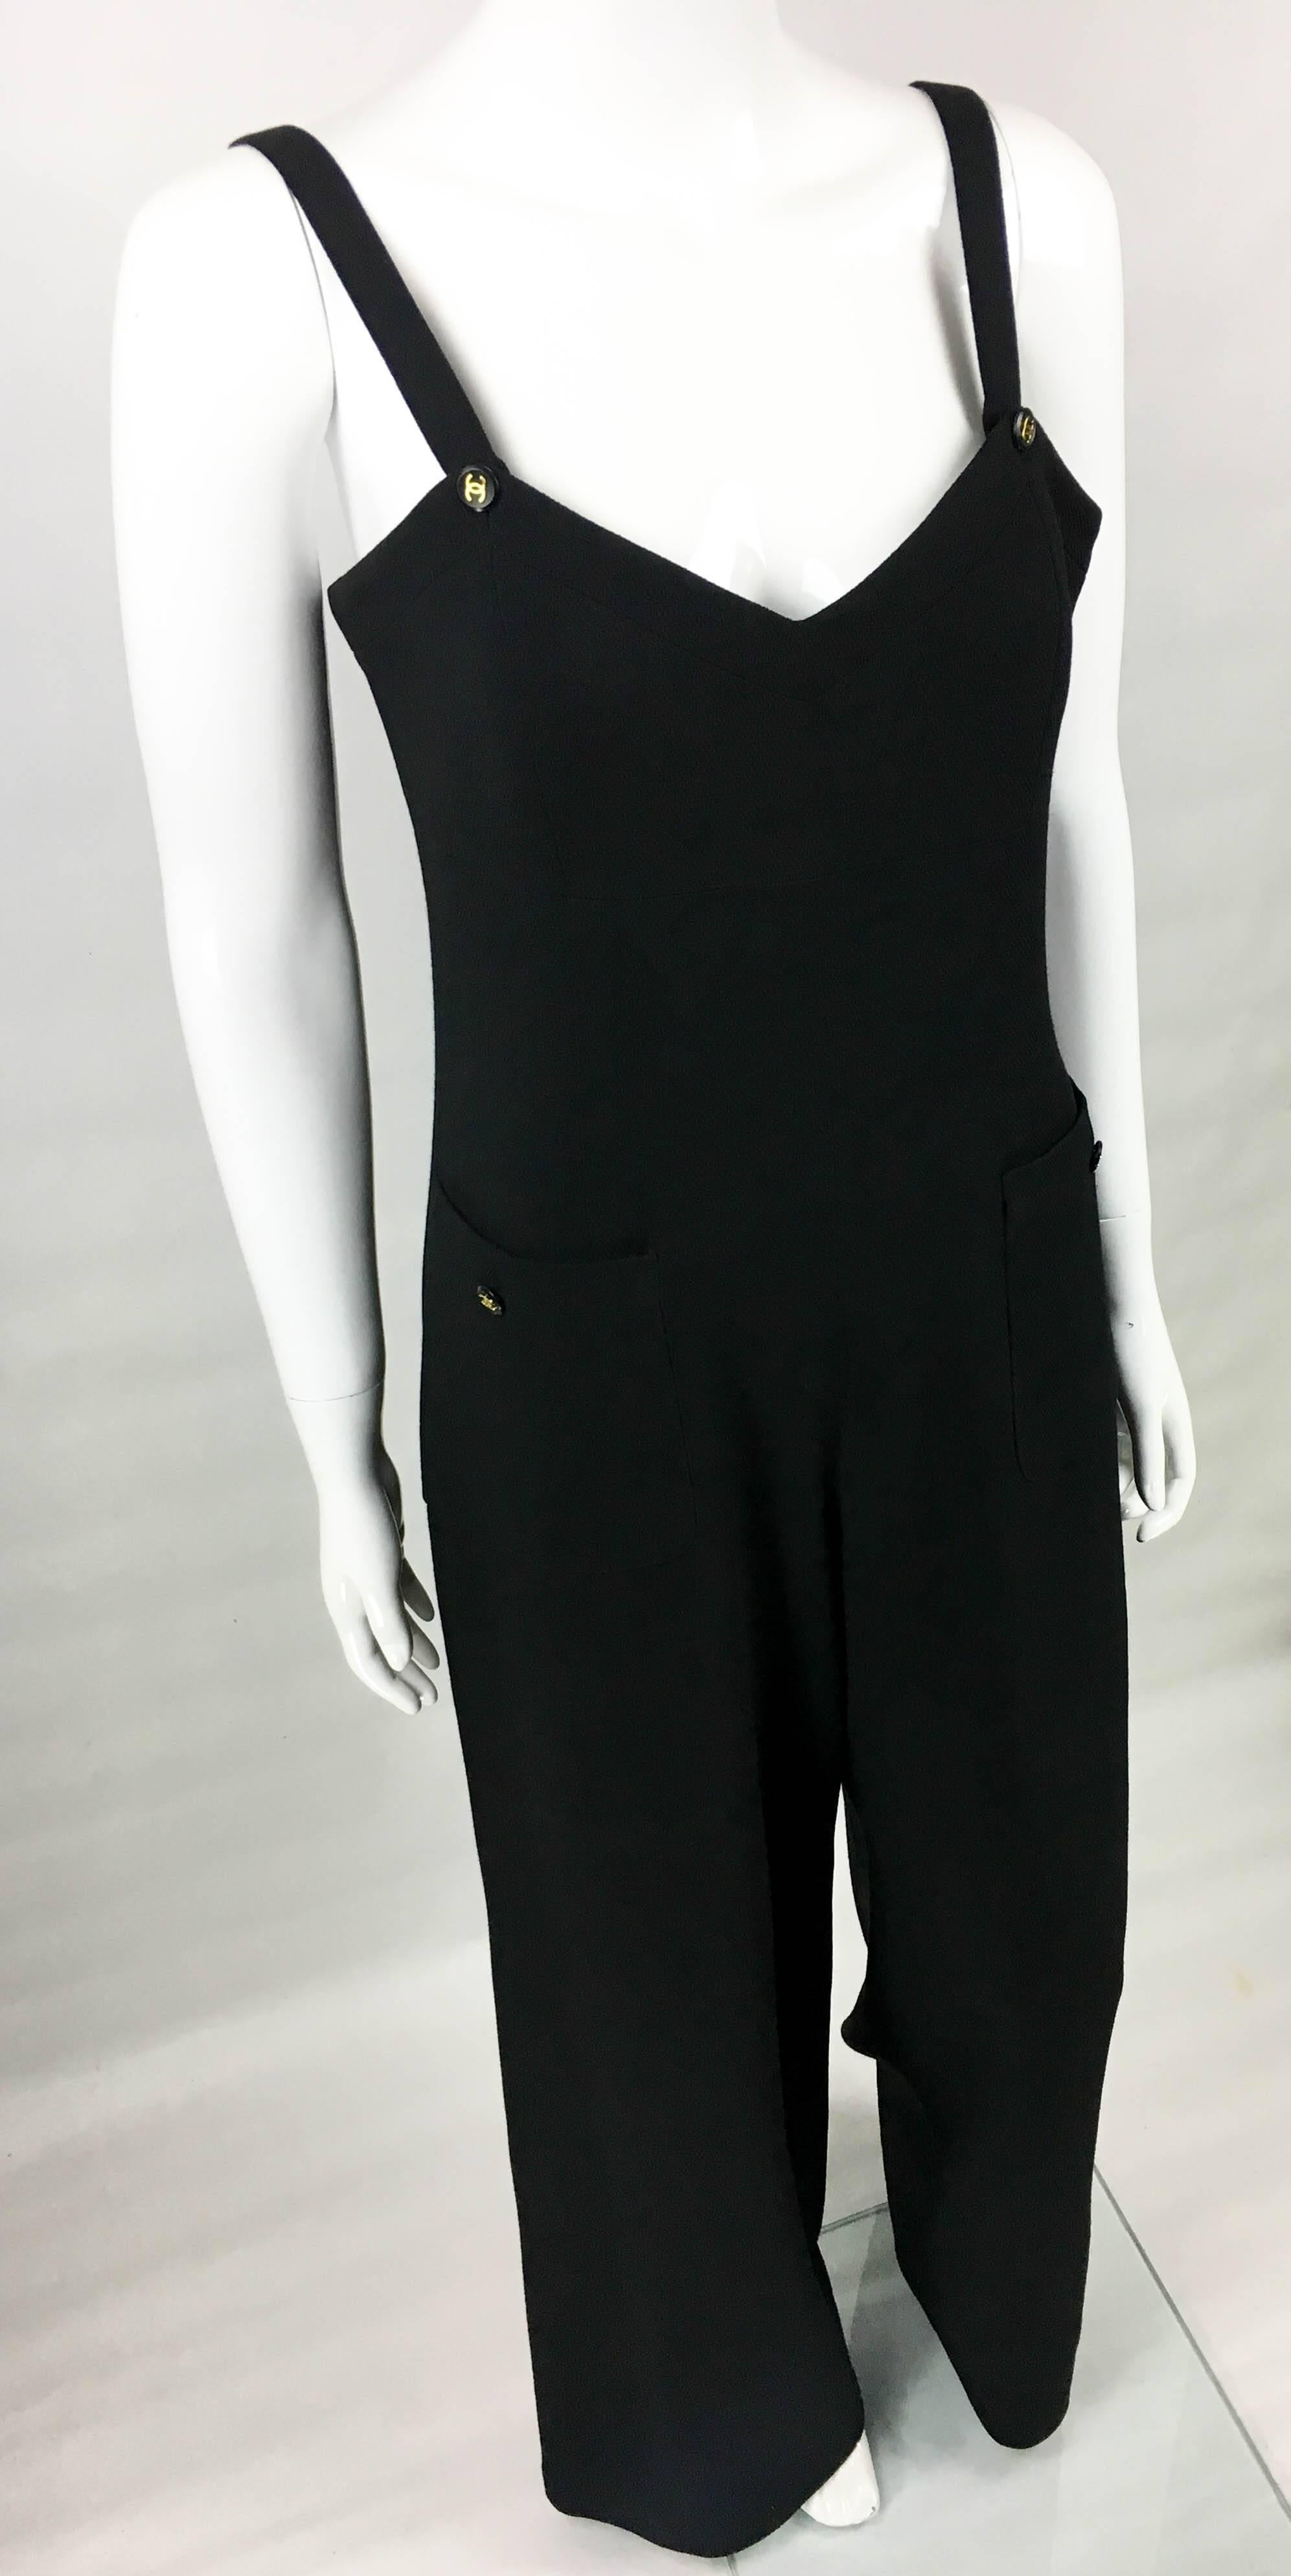 Women's 1995 Chanel Dungaree-Style Black Wool Jumpsuit